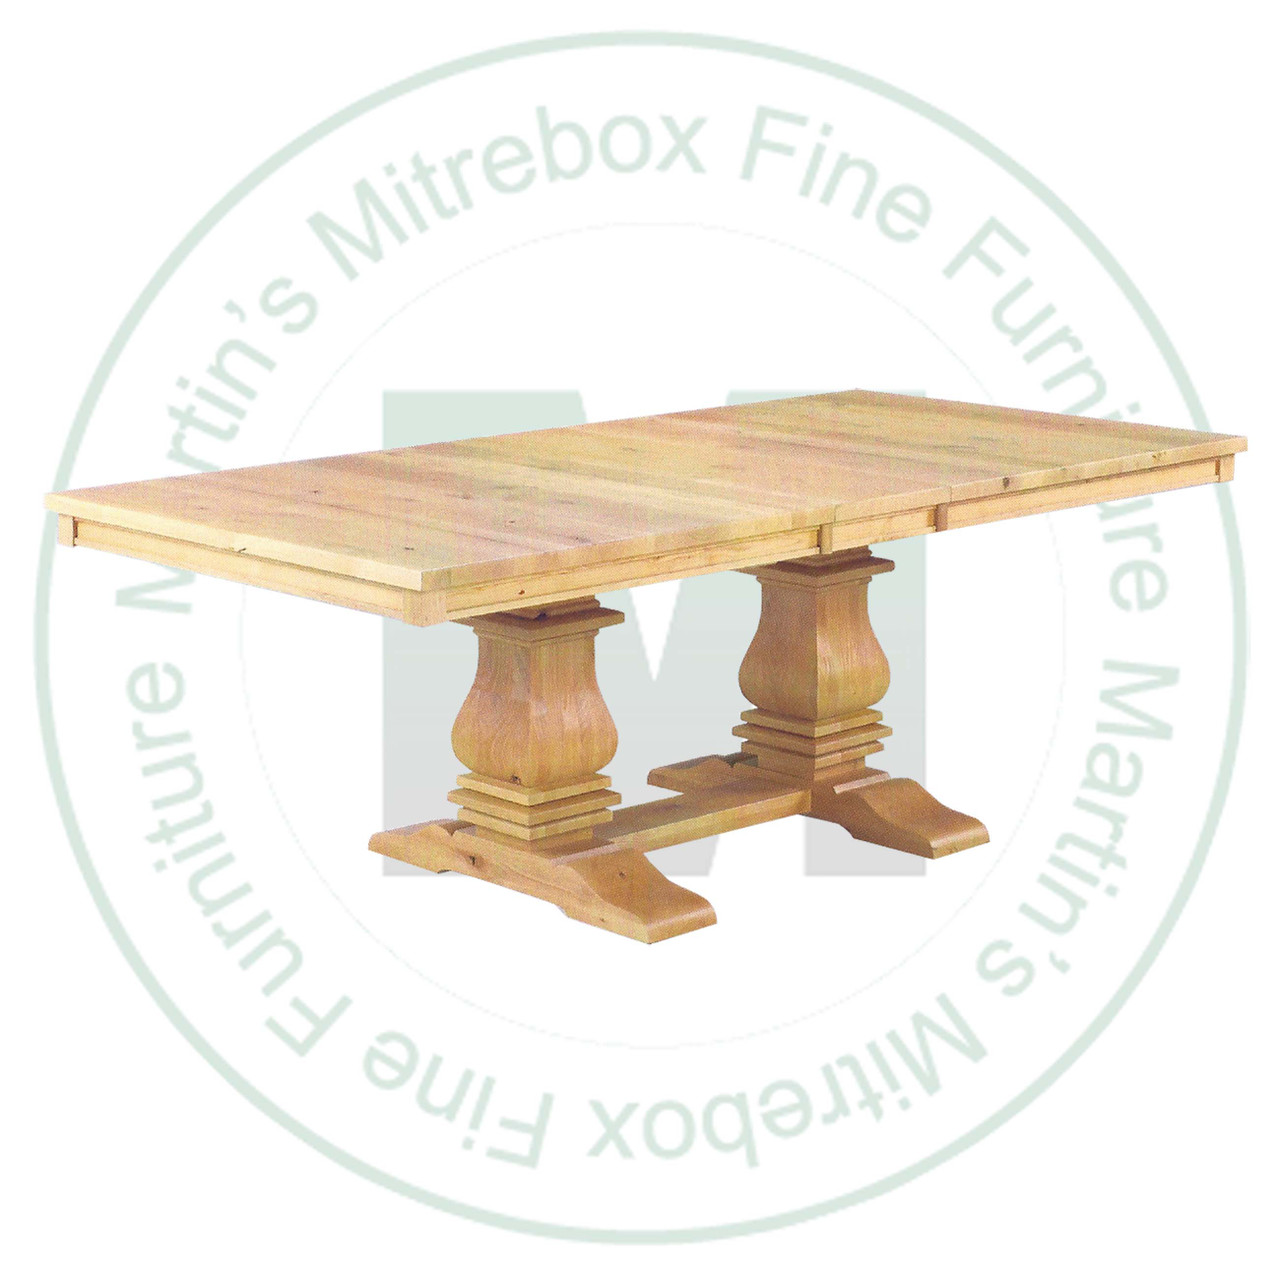 Maple Mediterranean Double Pedestal Table 48''D x 96''W x 30''H With 3 - 12'' Leaves. Table Has 1.25'' Thick Top